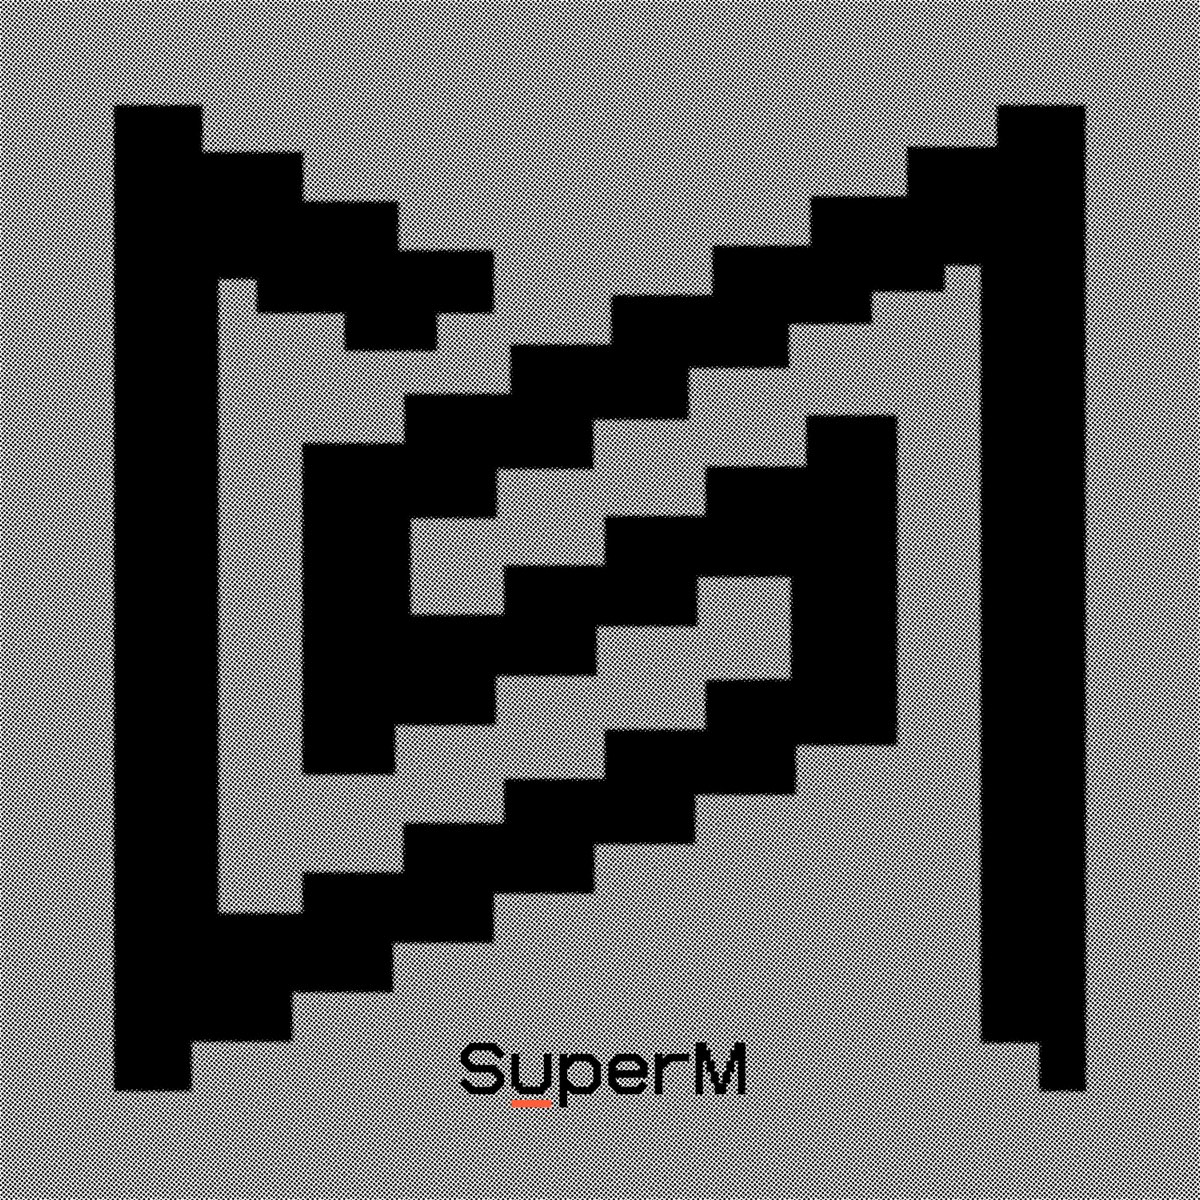 SuperM — Wish You Were Here cover artwork